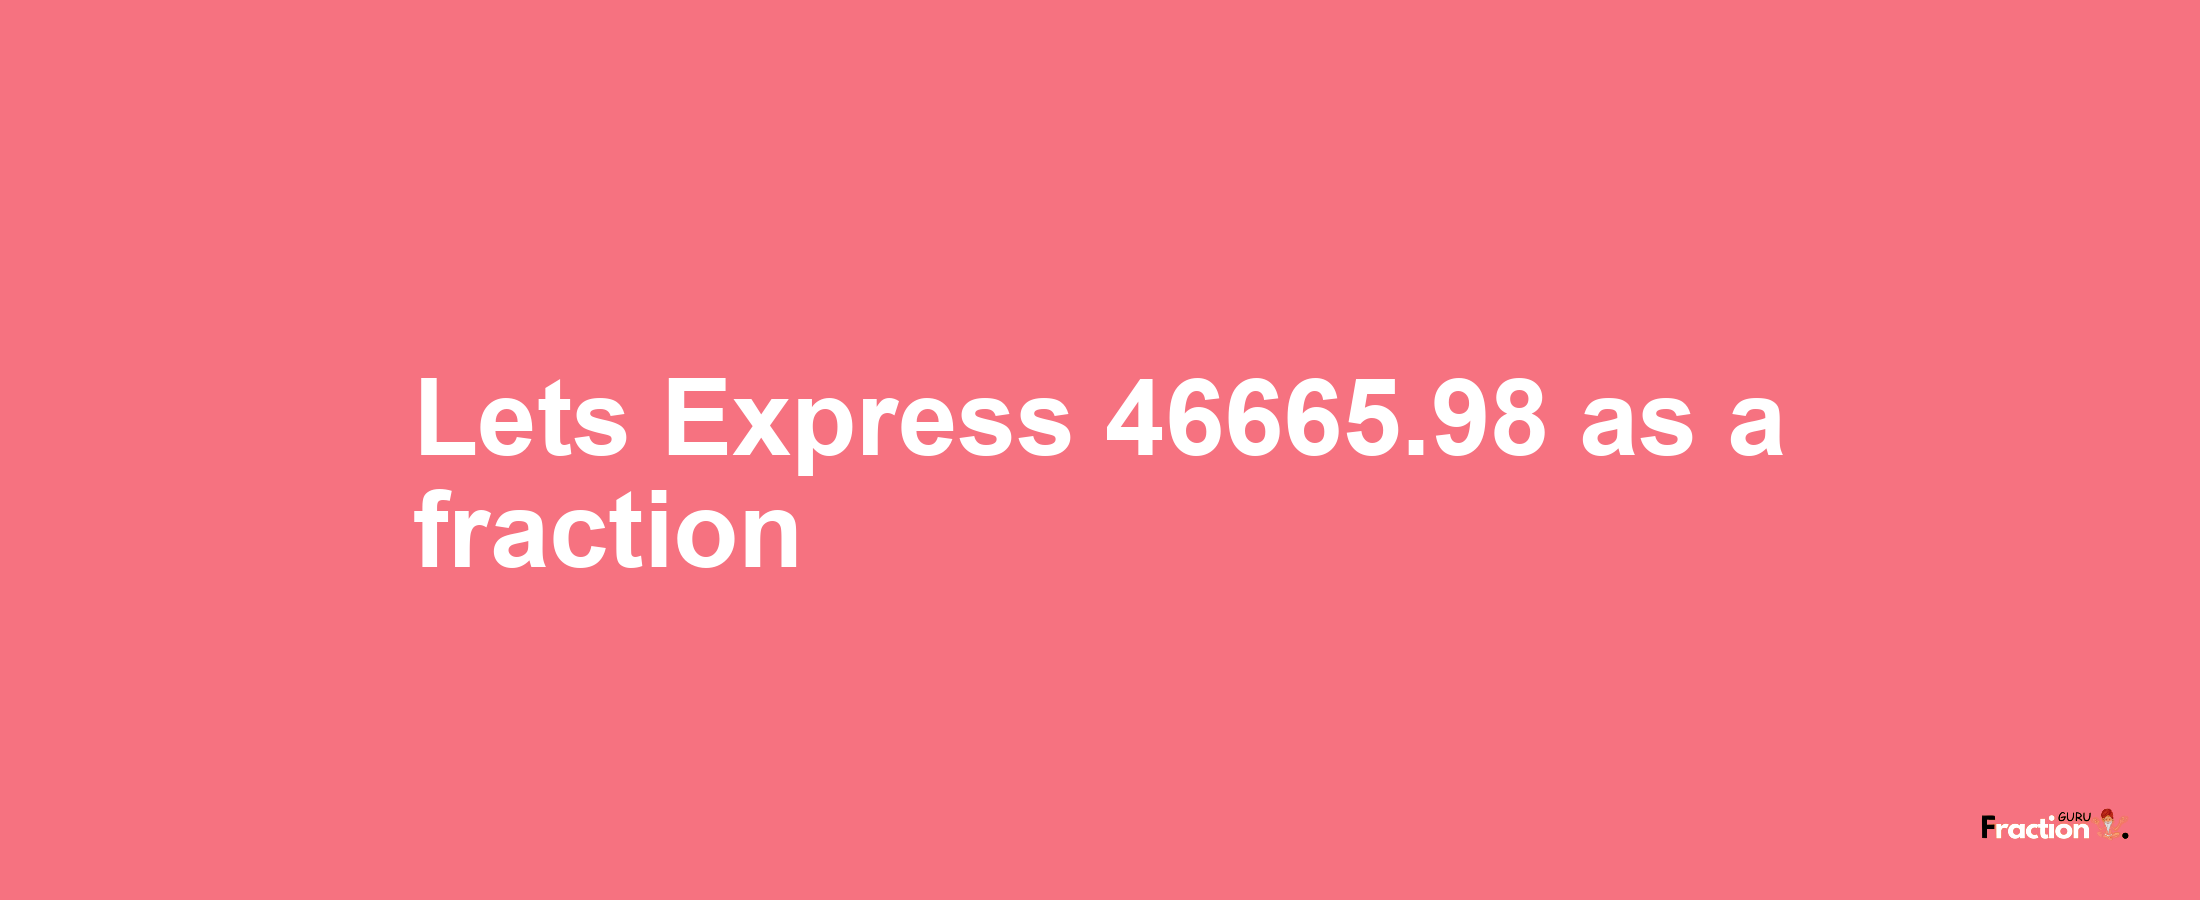 Lets Express 46665.98 as afraction